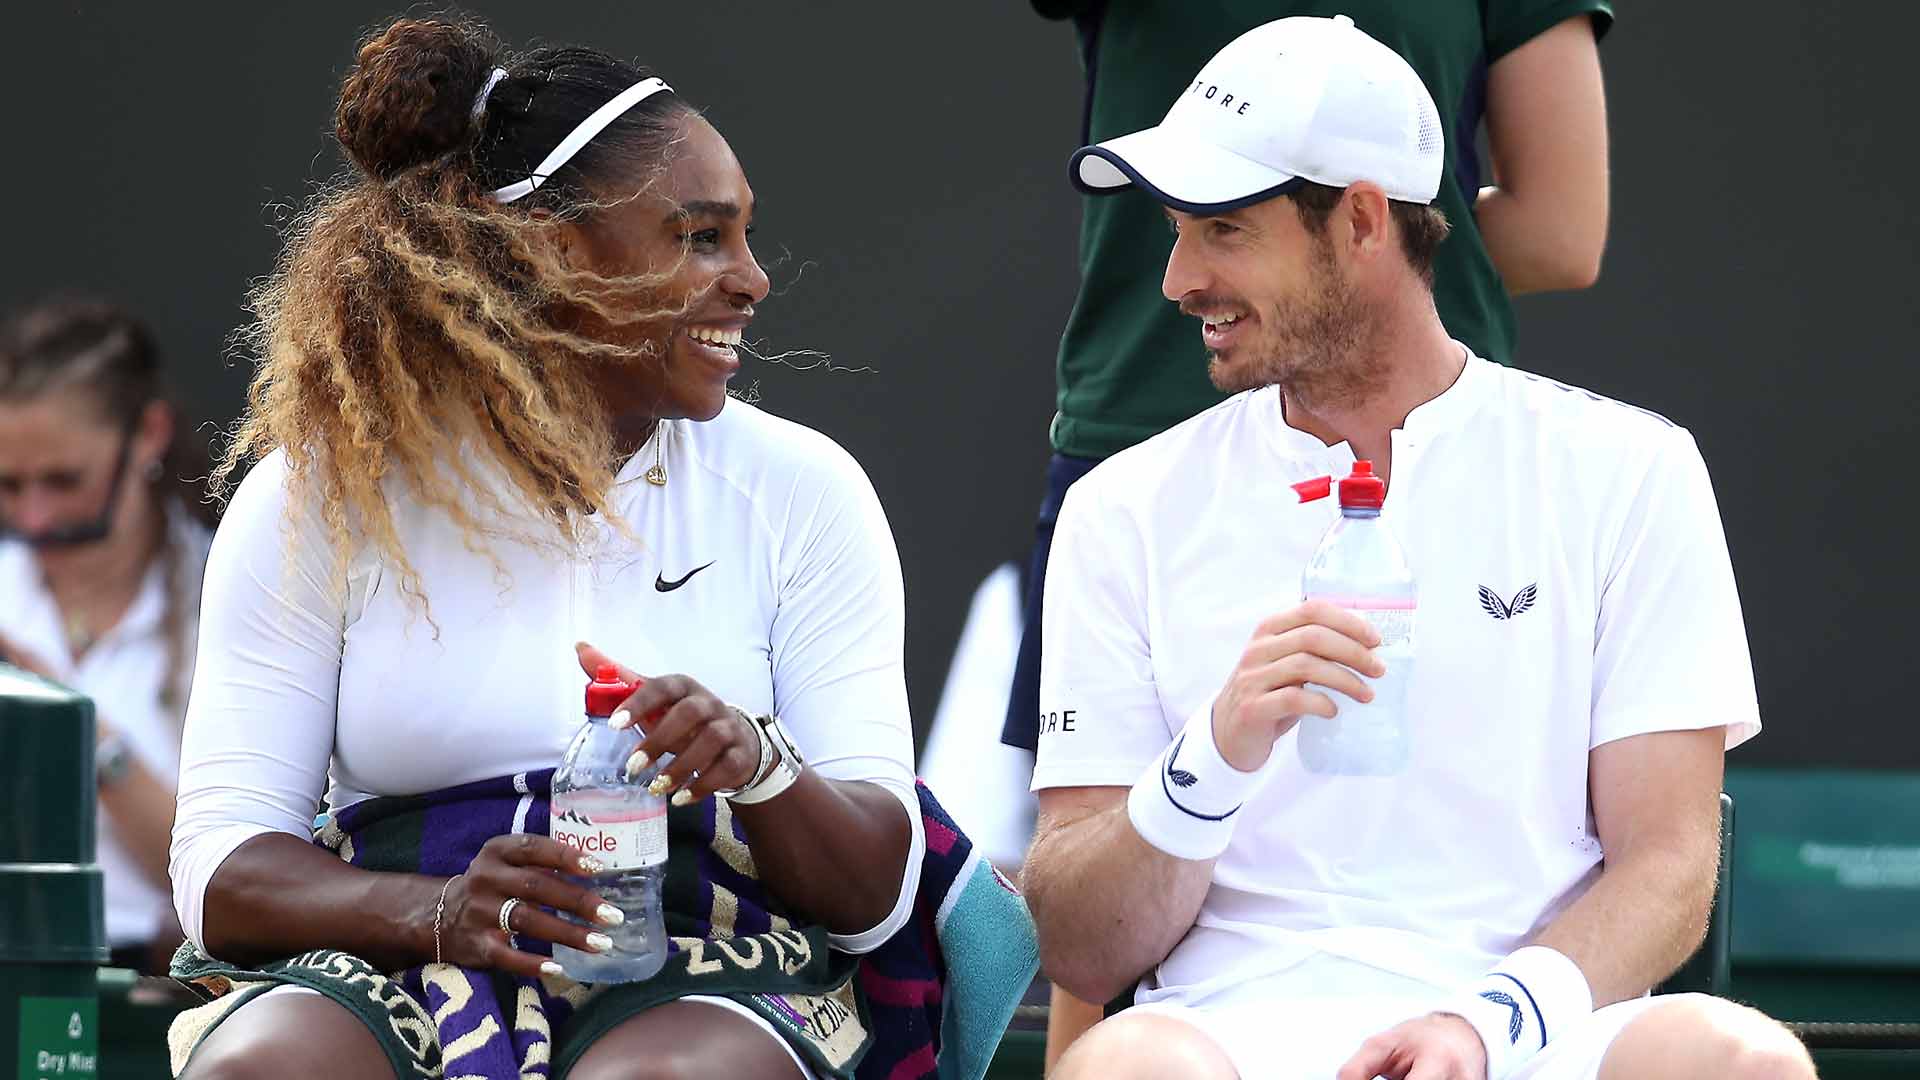 Serena Williams and Andy Murray played mixed doubles together at Wimbledon in 2019.